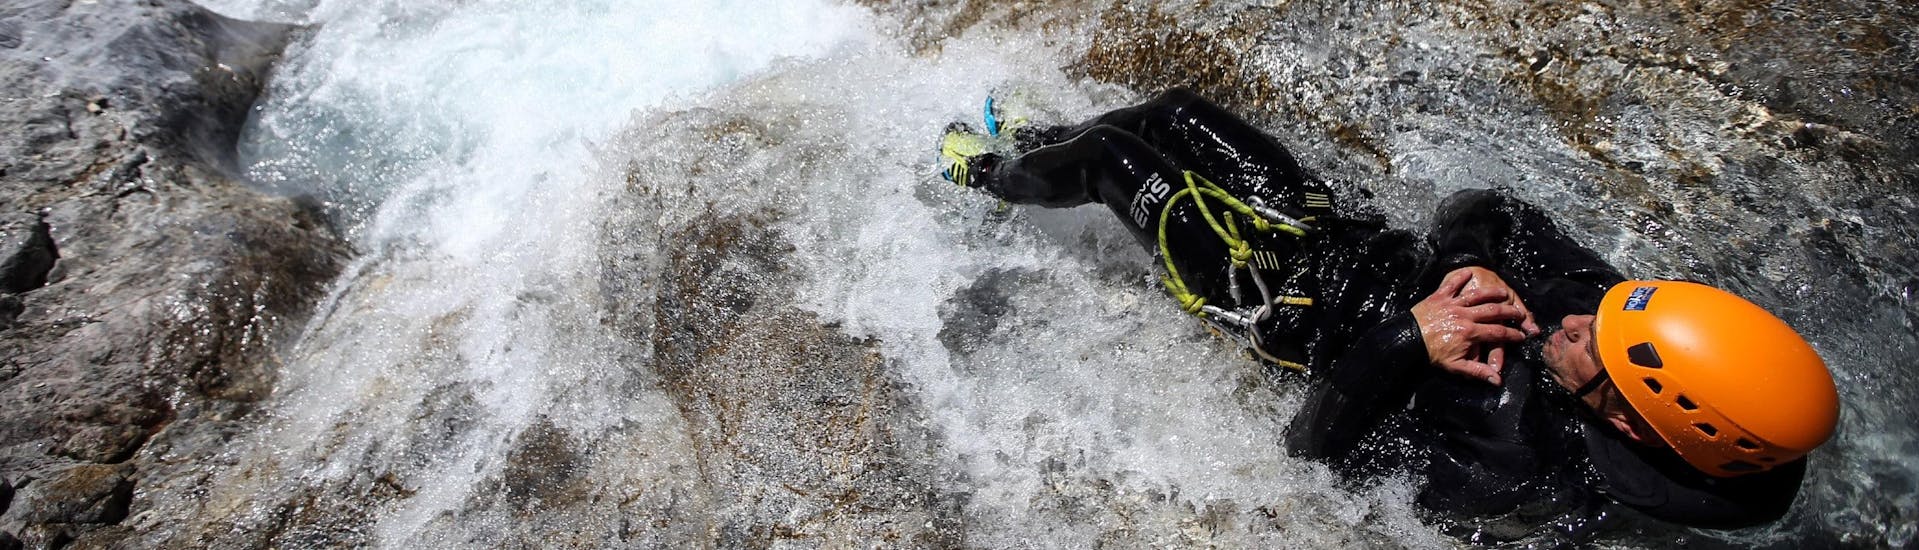 Expert Canyoning in Serre-Chevalier - Chantemerle - Canyon di Foresto.